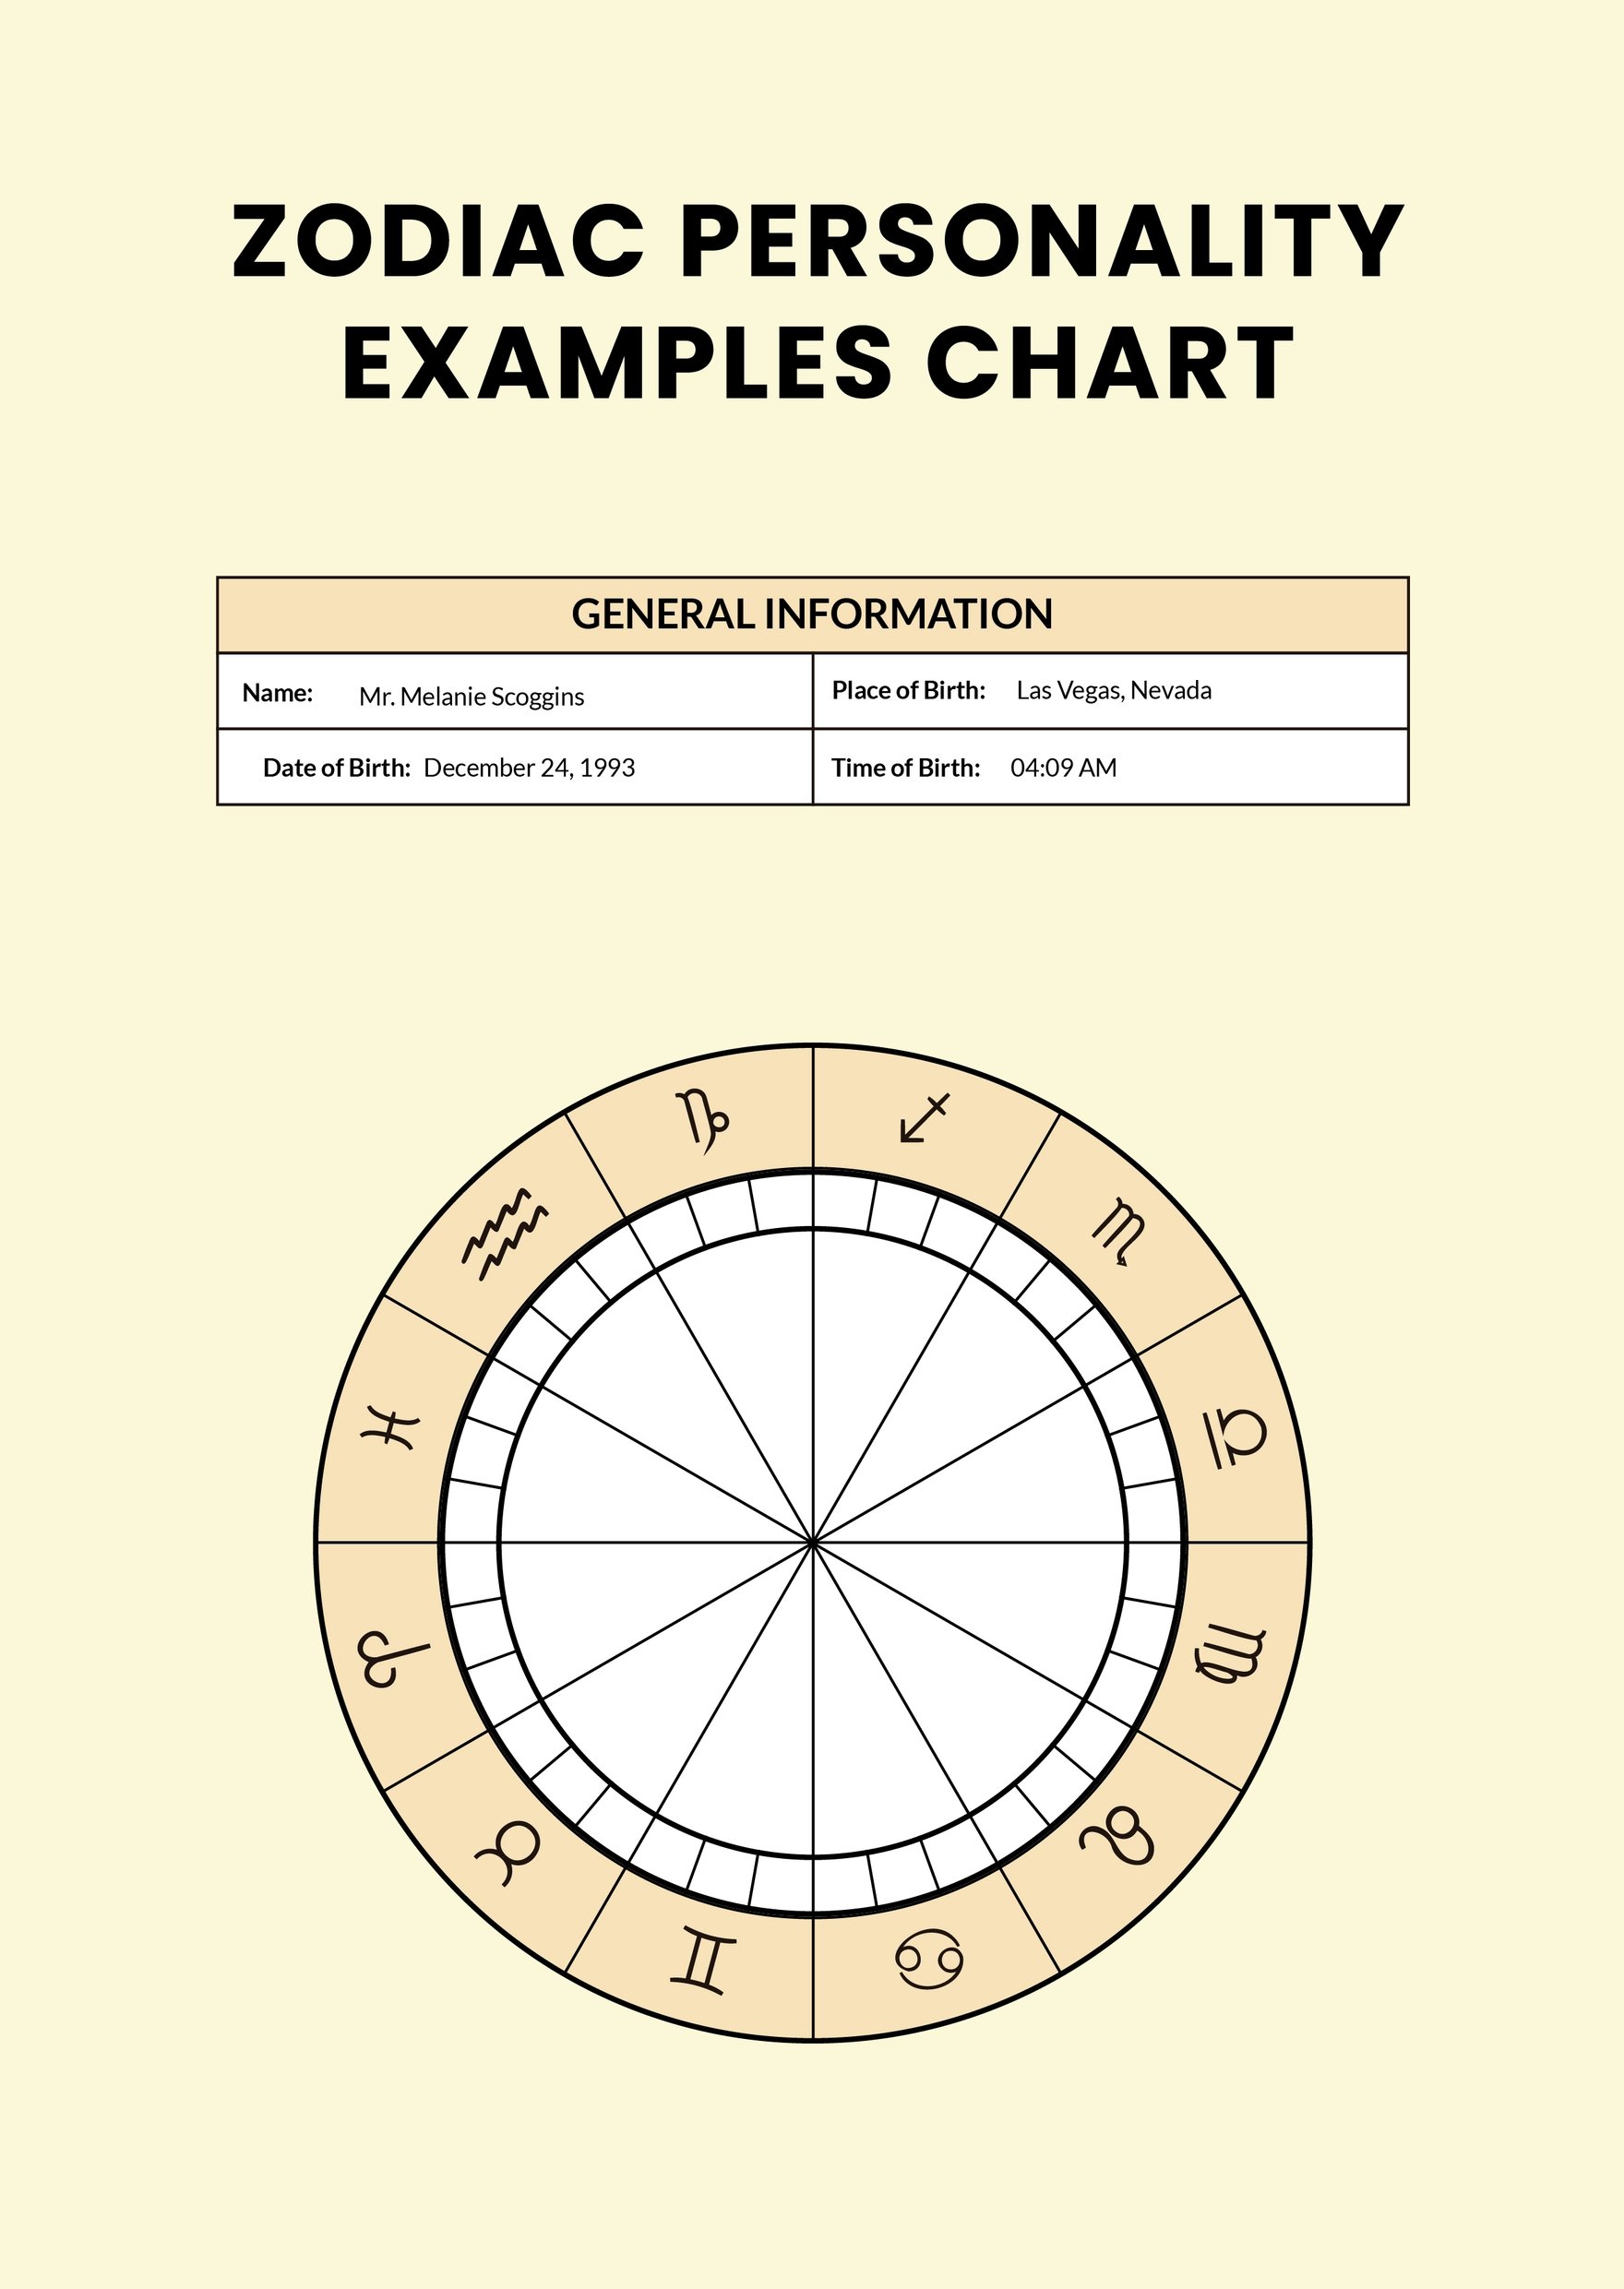 Free Zodiac Personality Examples Chart Template in PDF, Illustrator